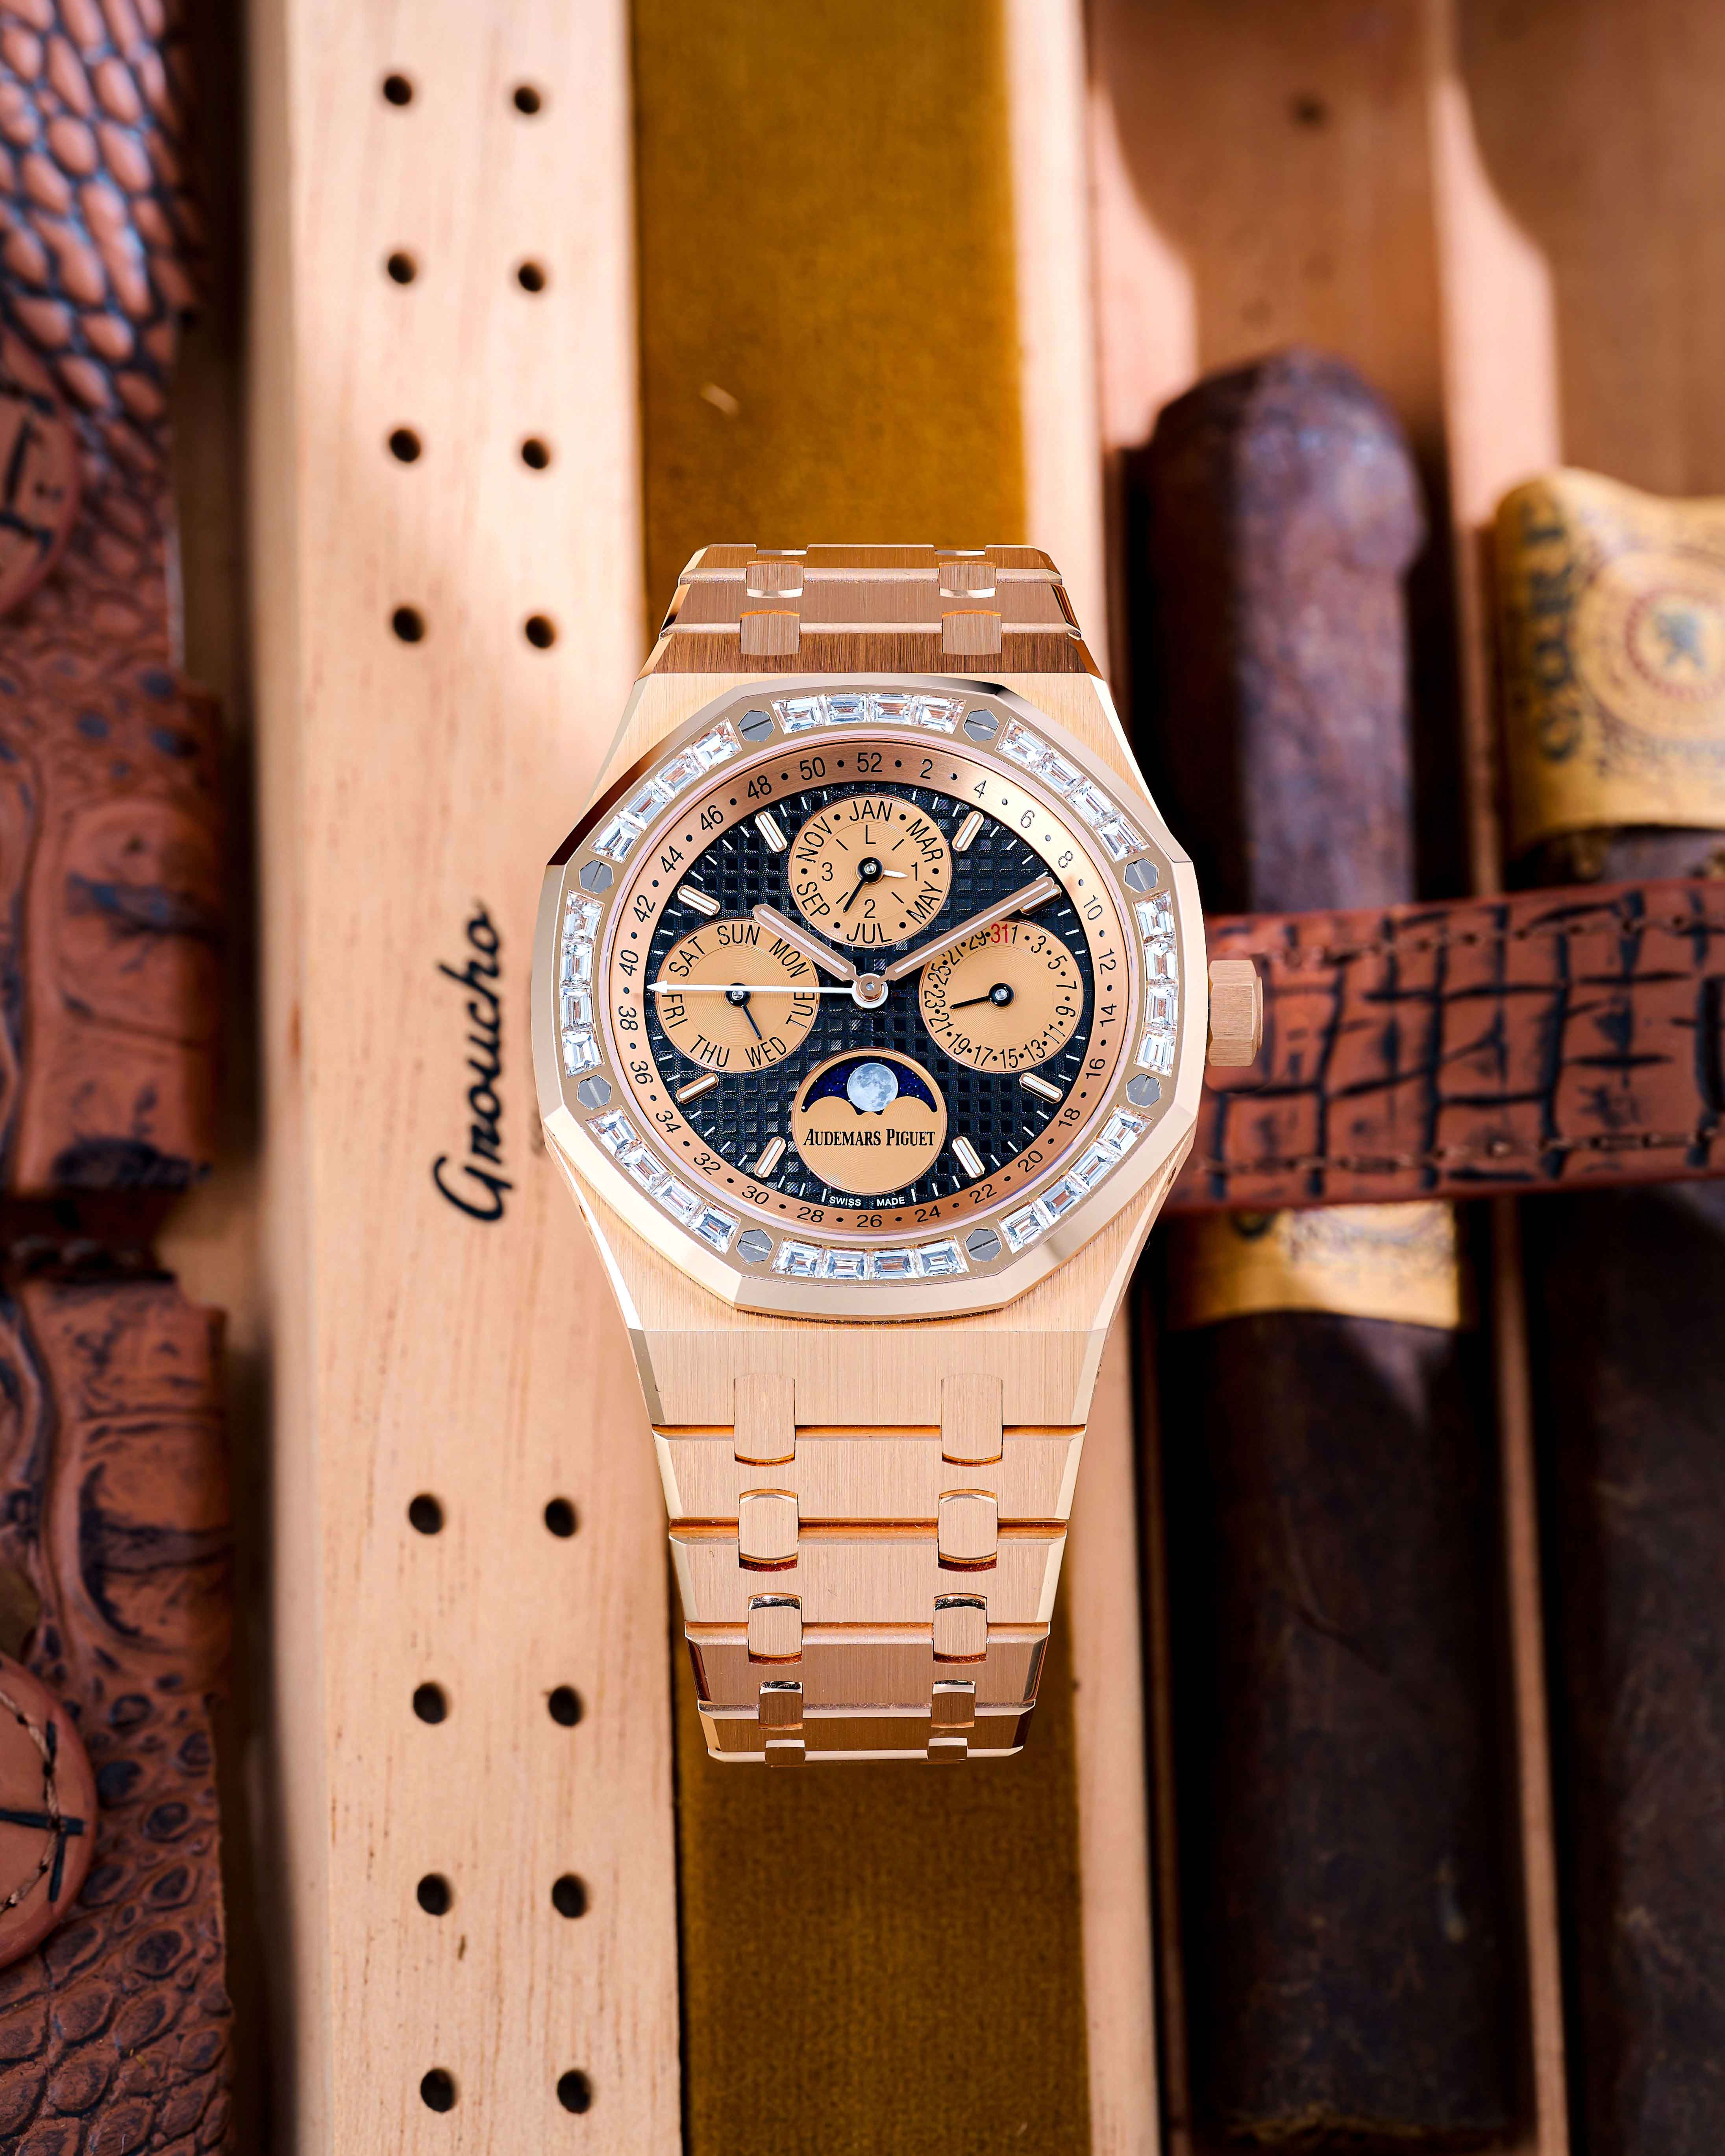 A Rose Gold Timepiece with Four Dials and a Diamond Bezel Lays Inside a Wooden Box Next to Cigars.